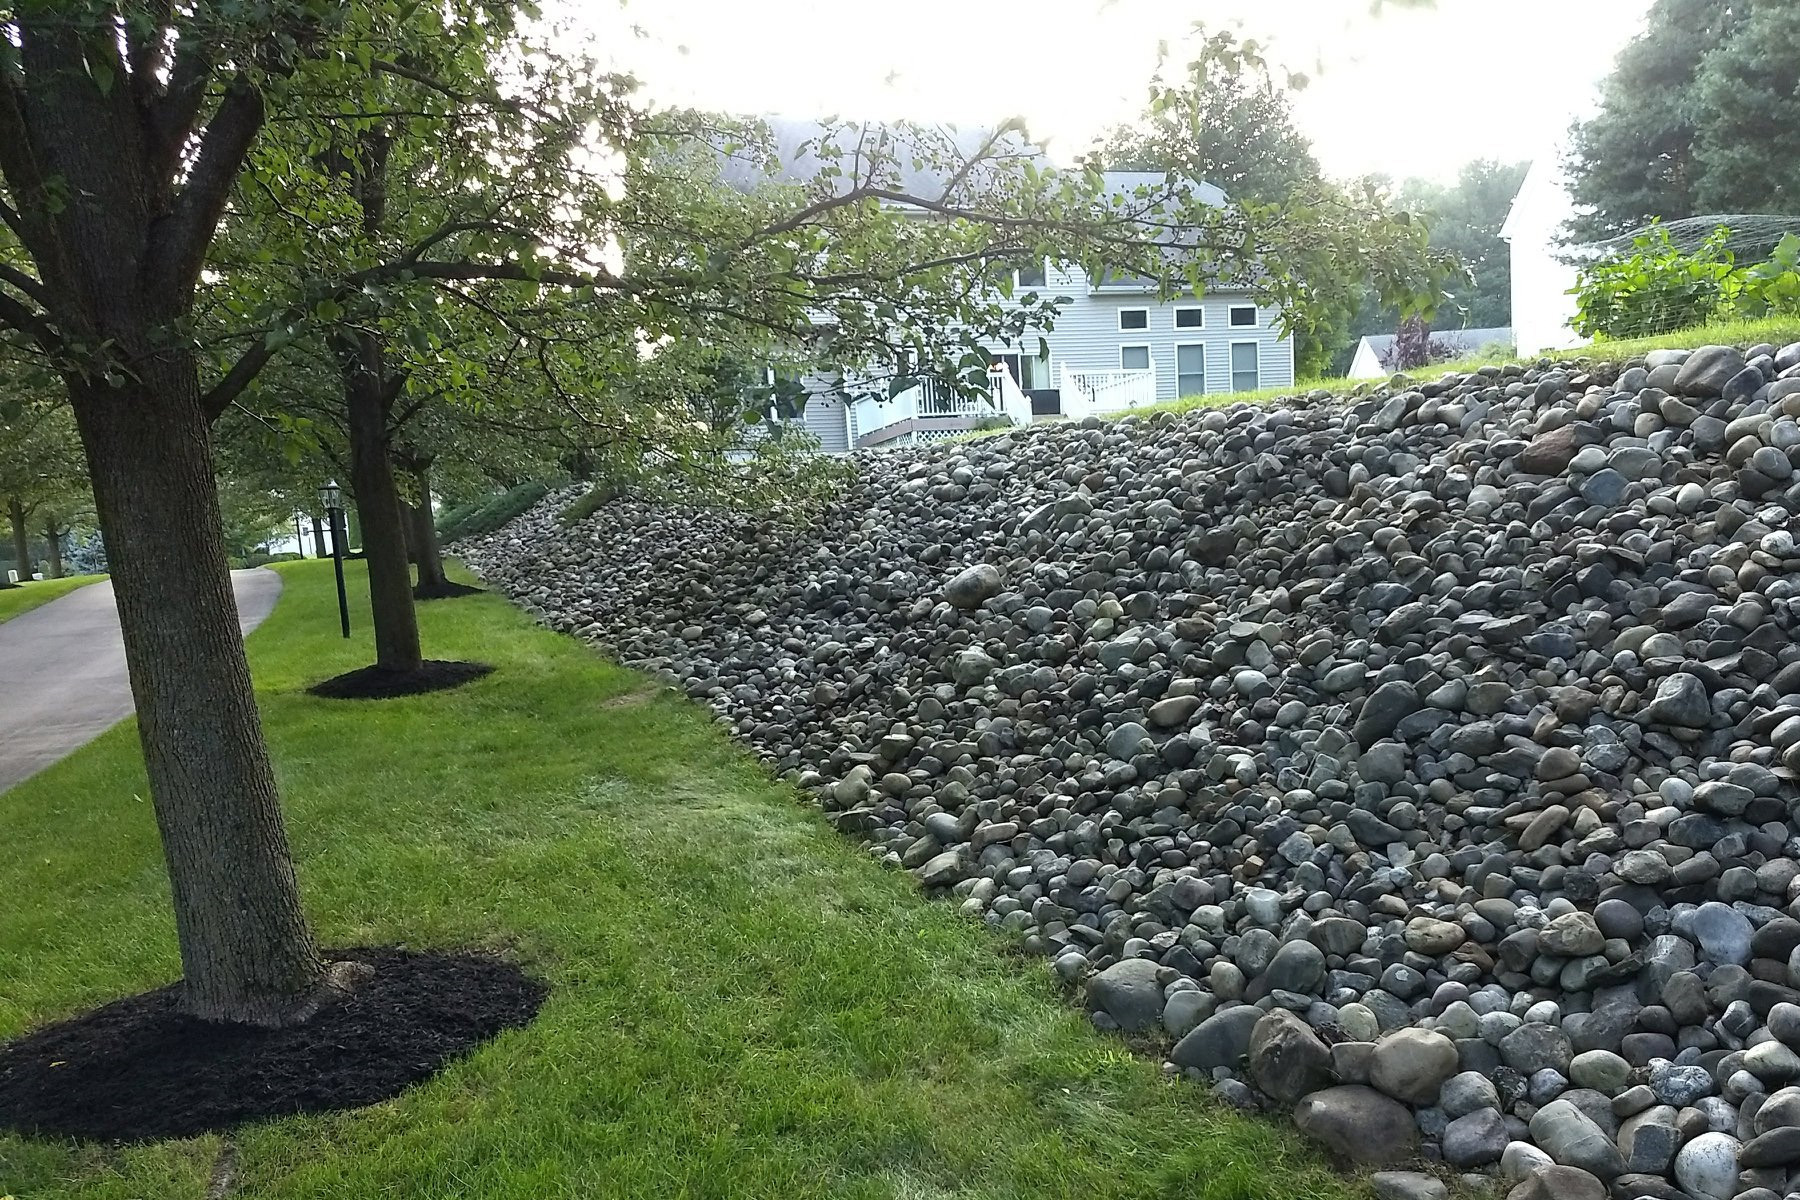 Thumbnail of a freshly weeded stone retaining wall with fresh tree mulch beds